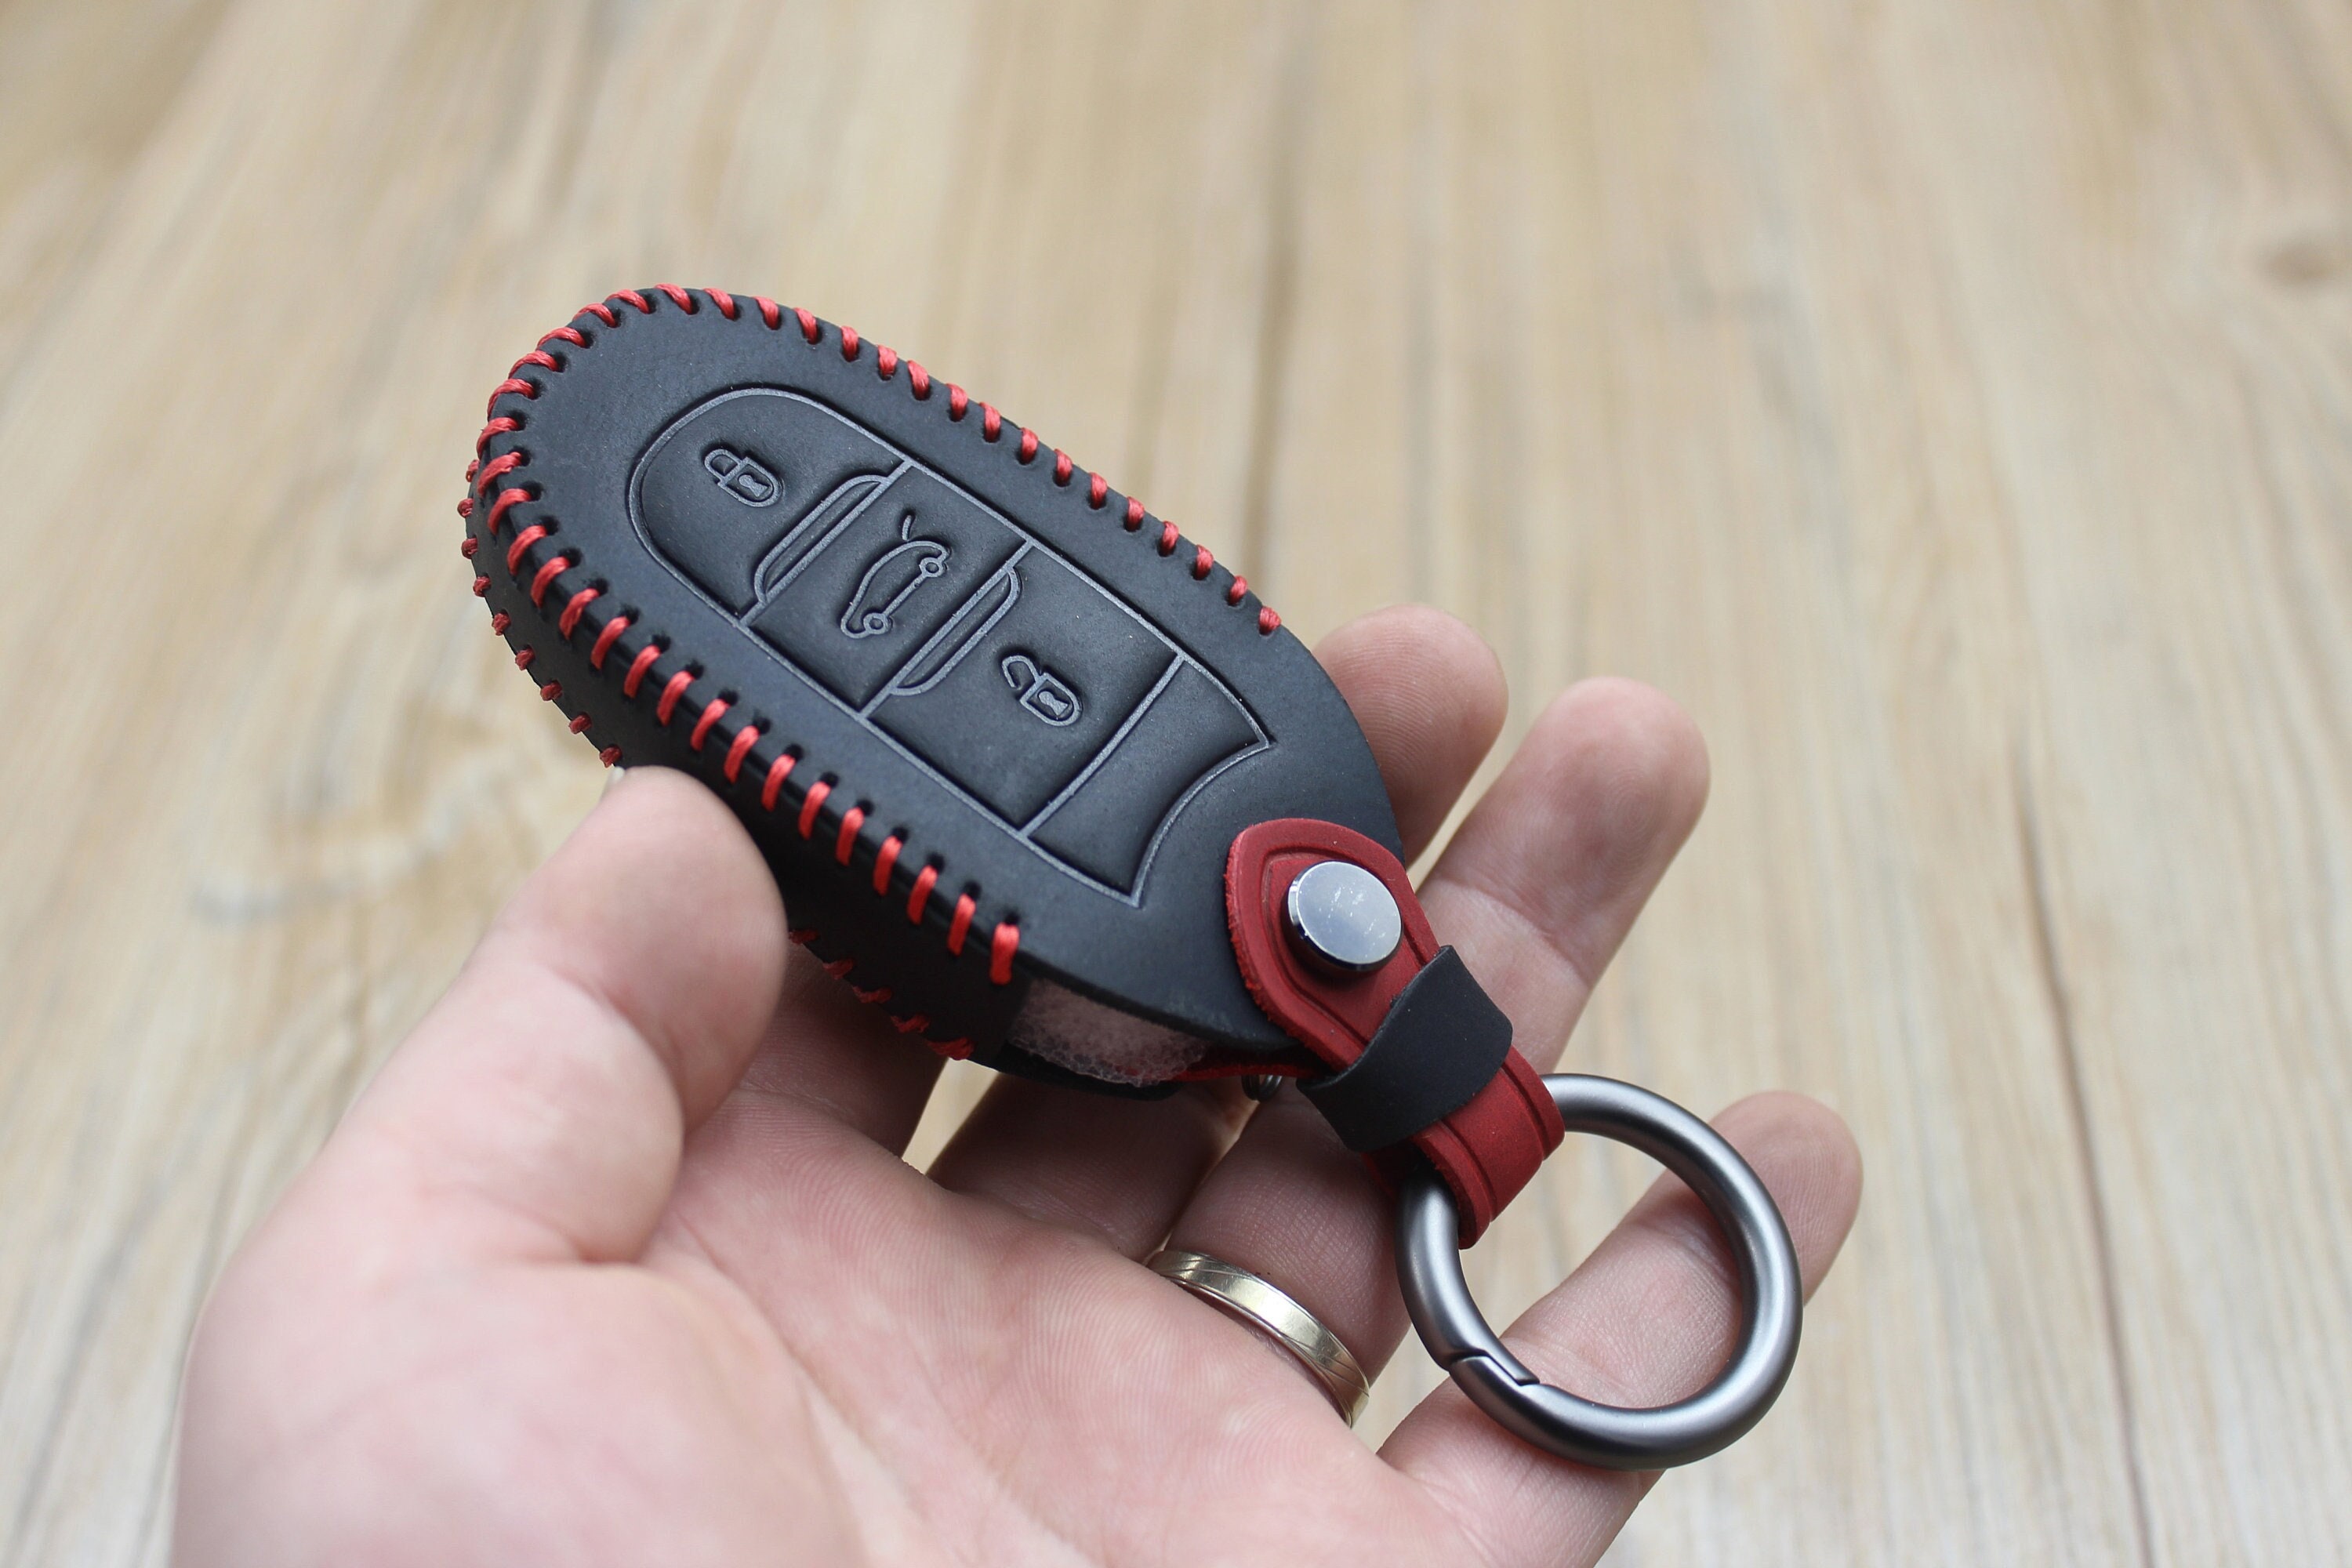 HIBEYO TPU Carbon Fiber Texture Car Key Fob Cover with Keychain fits for  Citroen Xsara C5 C6 Ds4 Peugeot 308 407 607 Ds3 Ds4 Car Key Case Cover  Jacket